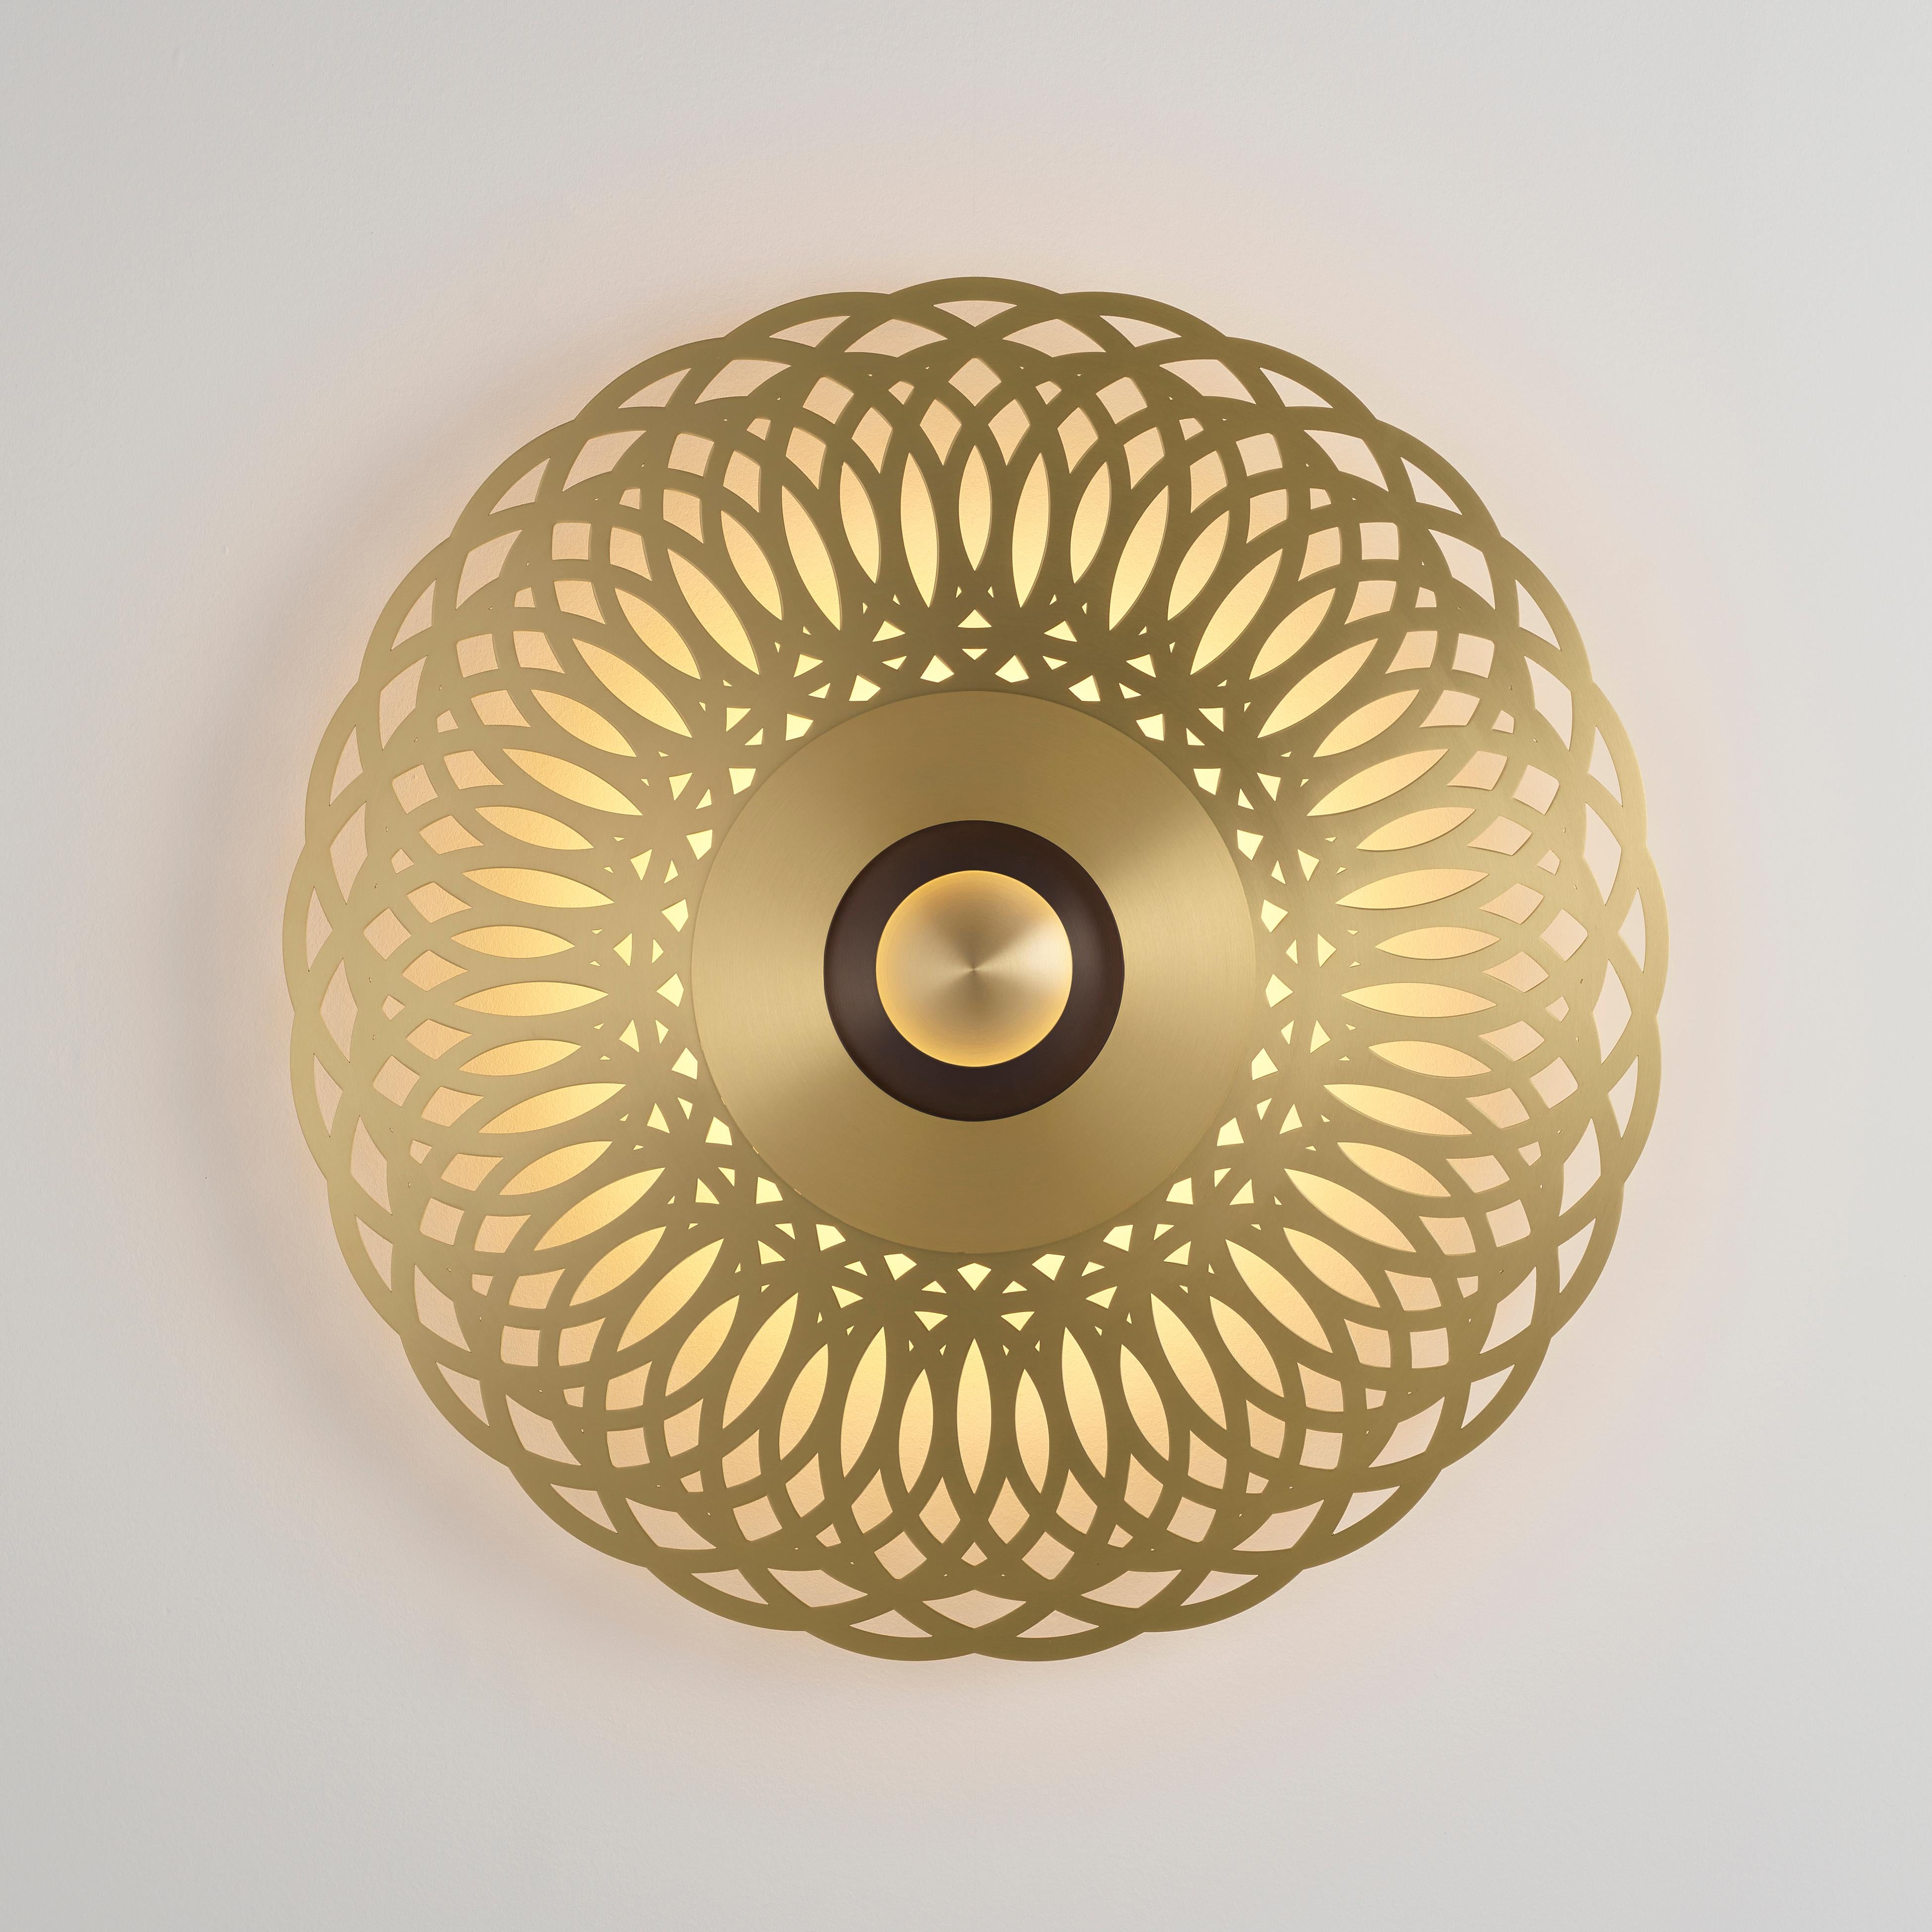 Atmos lace wall light by Emilie Cathelineau
Dimensions: D 79.3 cm
Materials: solid brass, polycarbonate diffuser.
Others finishes and dimensions are available.

All our lamps can be wired according to each country. If sold to the USA it will be